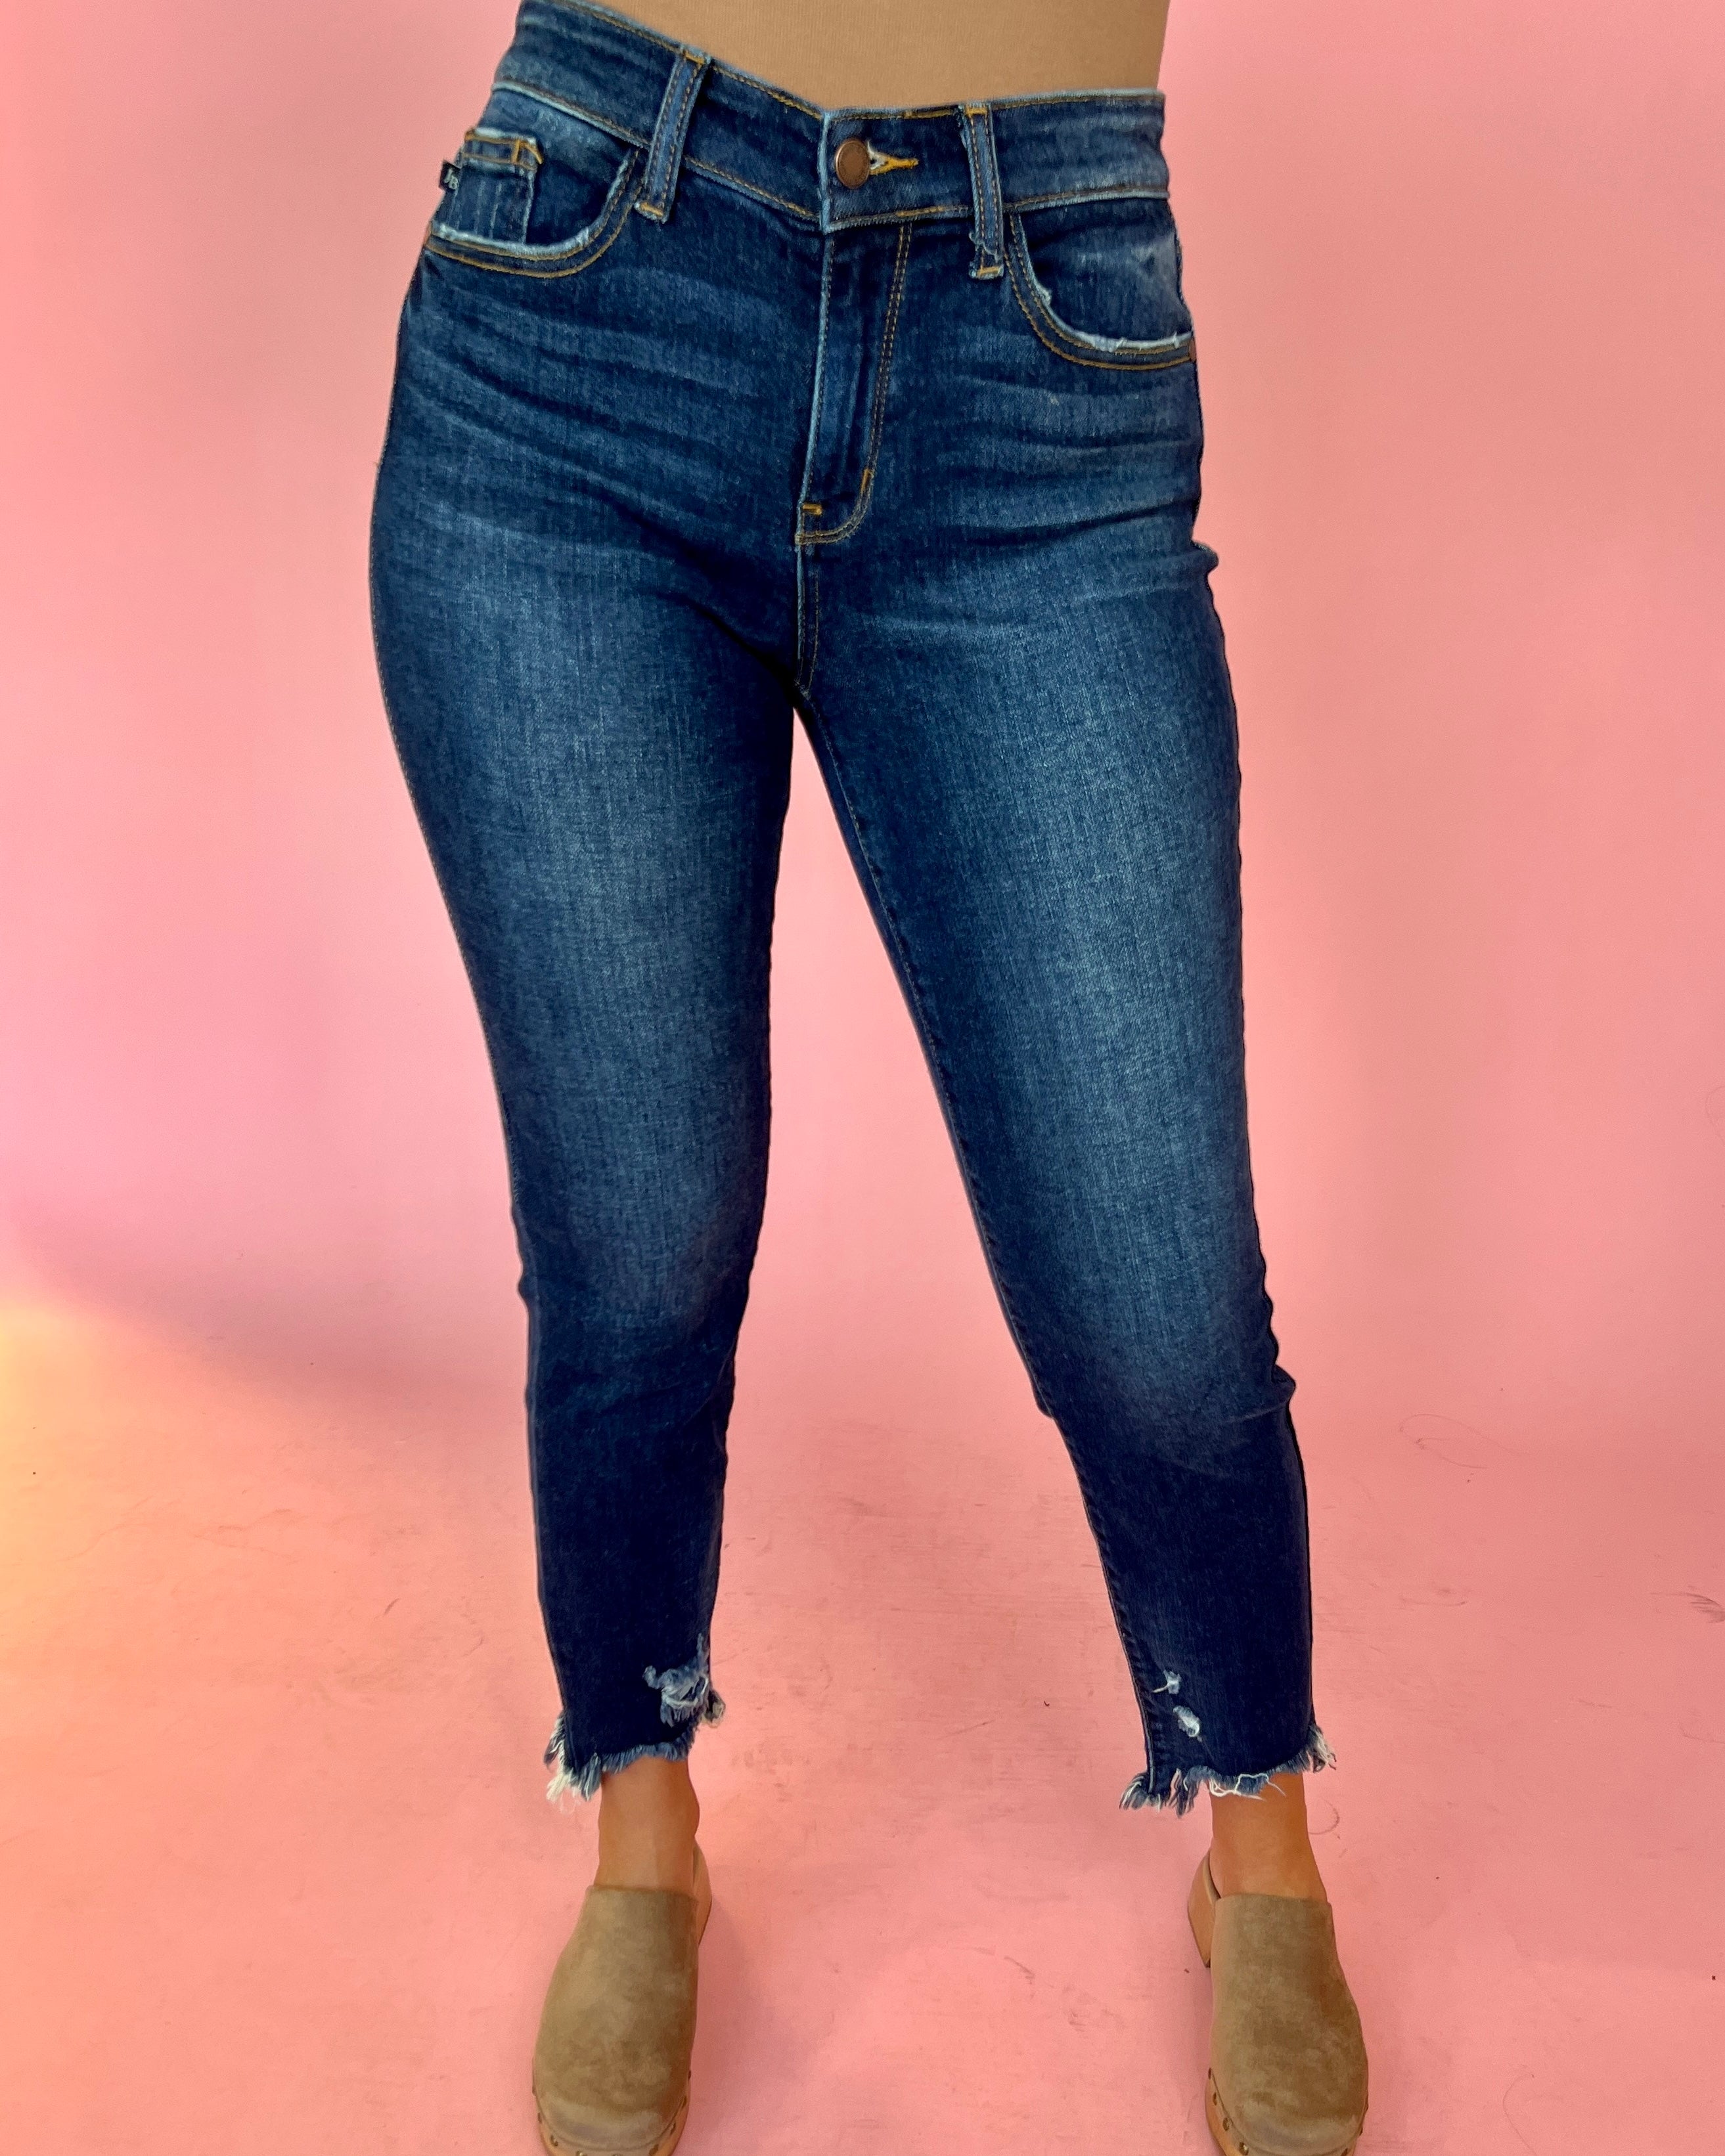 Getting My Way Dark Blue Midrise Distressed Slim Fit Jeans-Shop-Womens-Boutique-Clothing